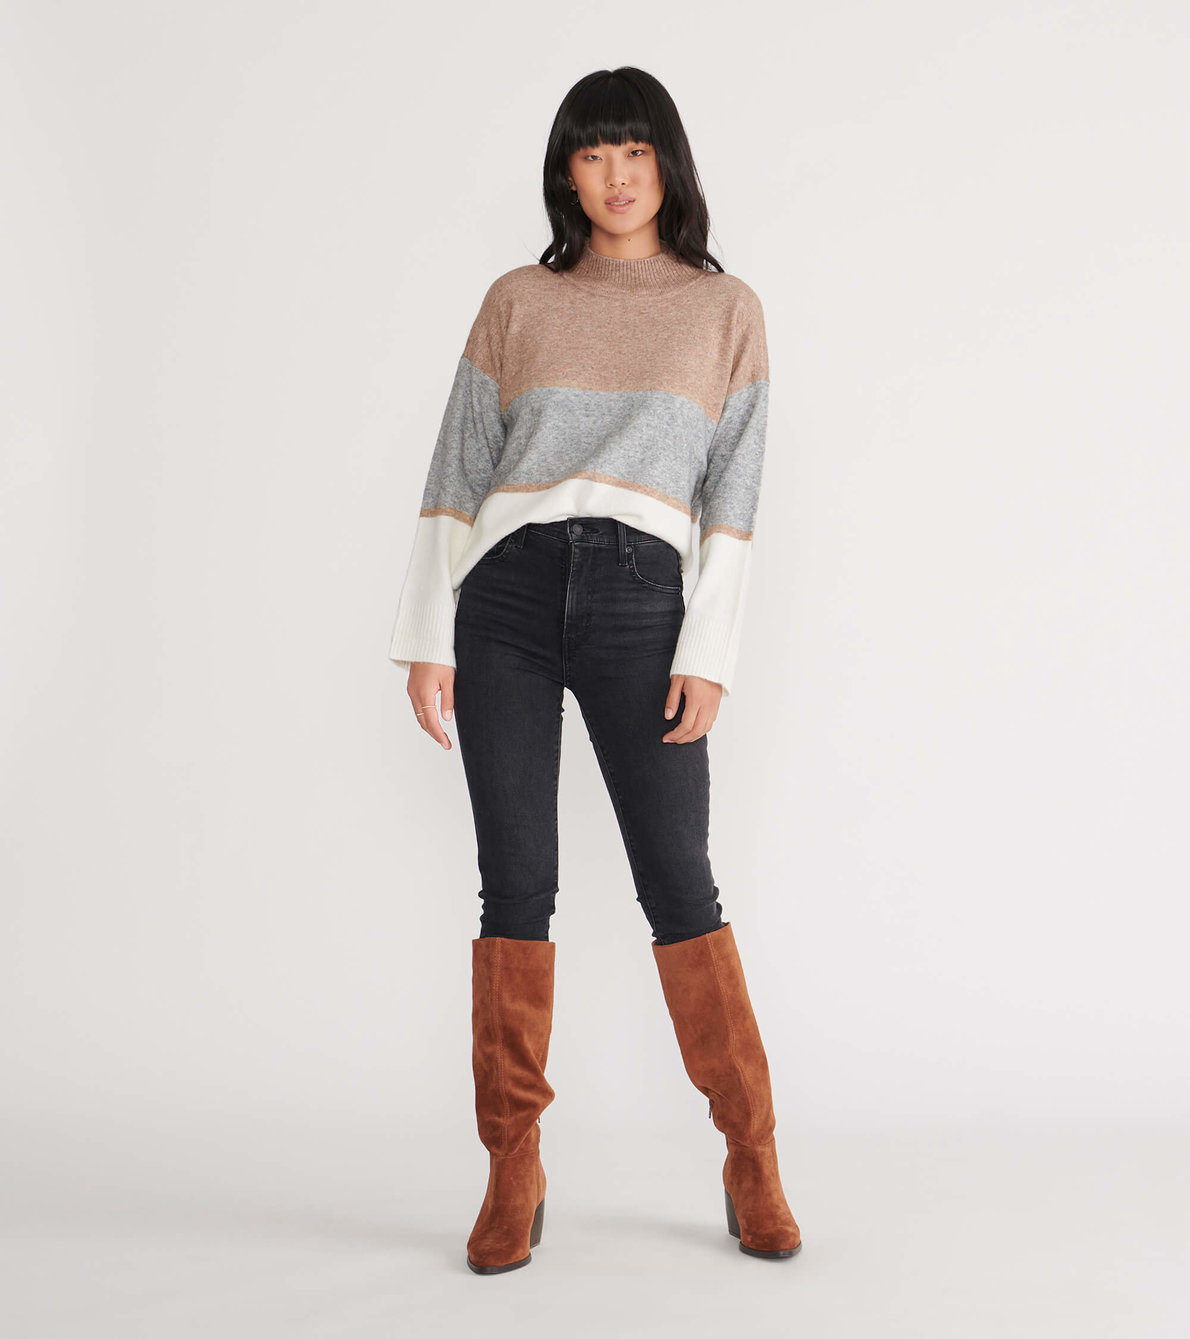 View larger image of Mock Neck Sweater - Camel Colour Block